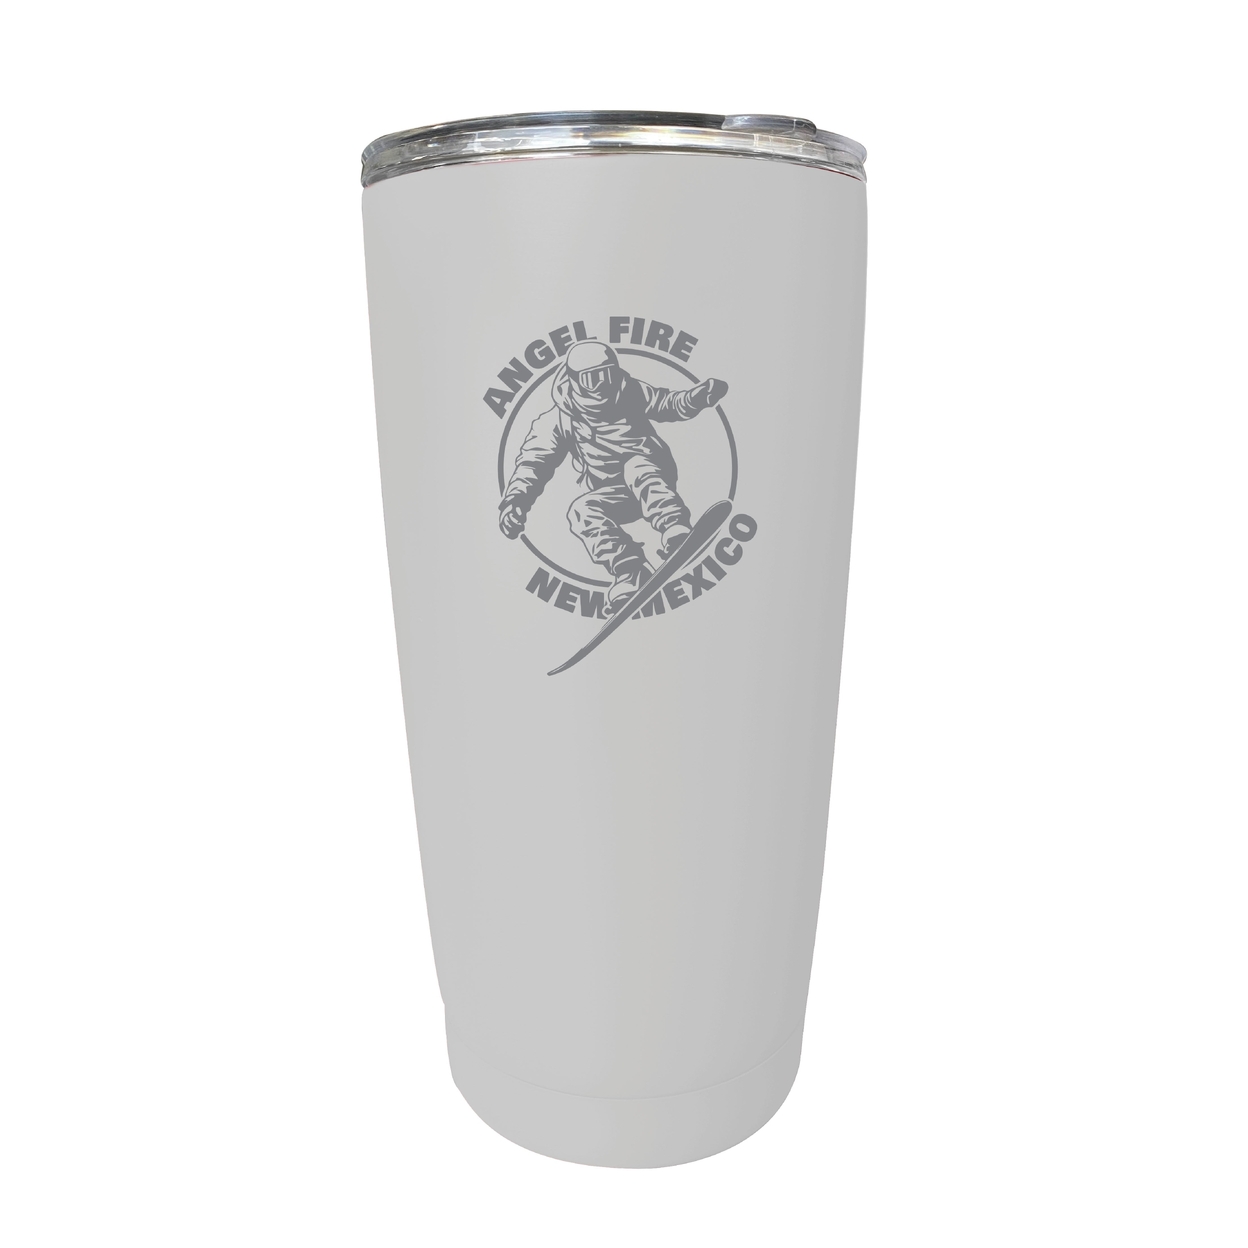 Angel Fire New Mexico Souvenir 16 Oz Engraved Stainless Steel Insulated Tumbler - Red,,Single Unit